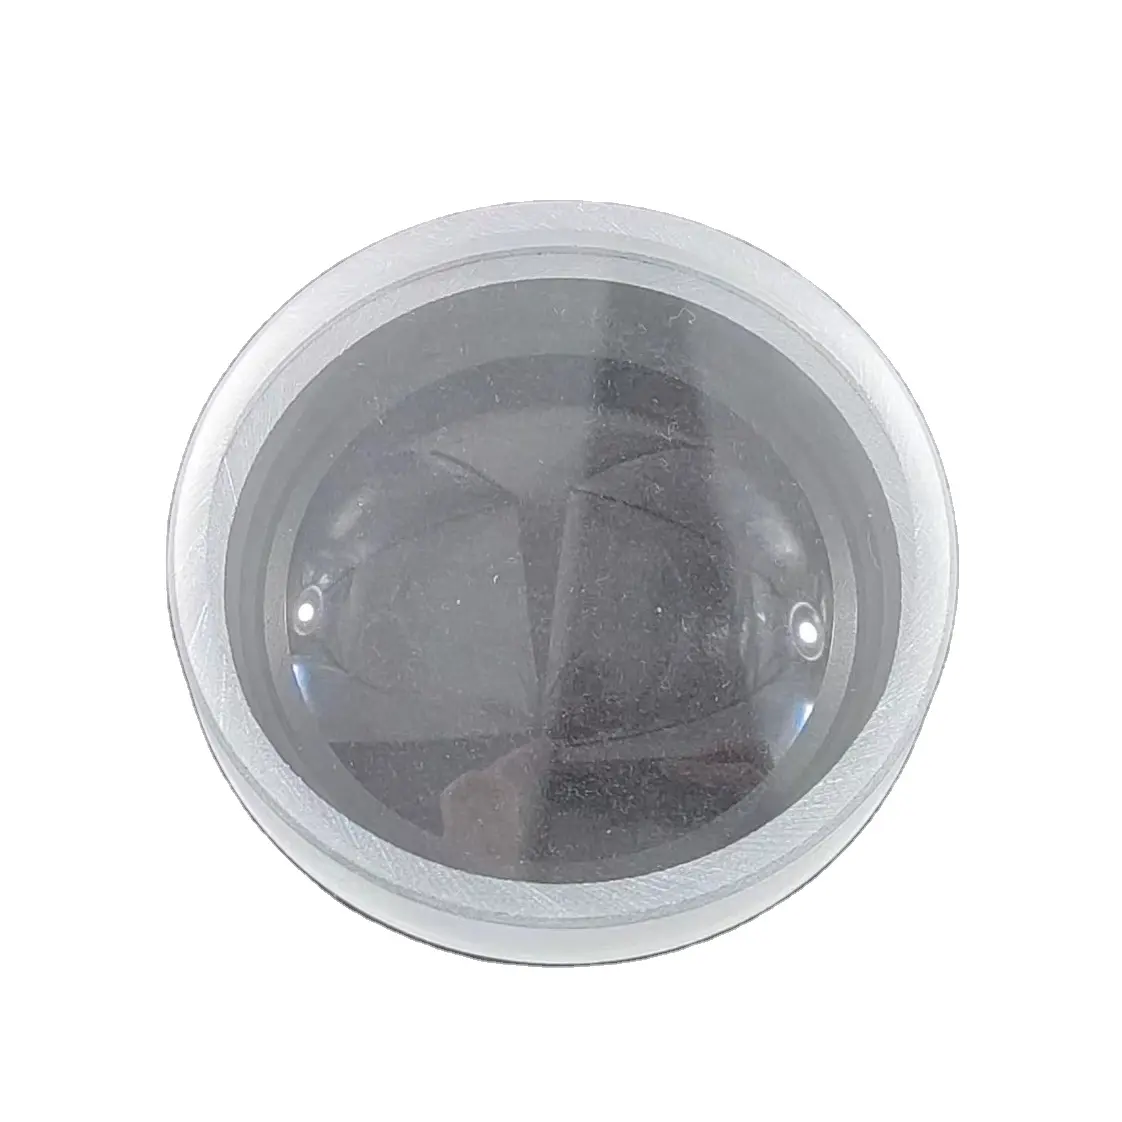 Custom Optical D30*10 Plano-concave Lens 25 Focal Length Imaging Lens Product For Optical